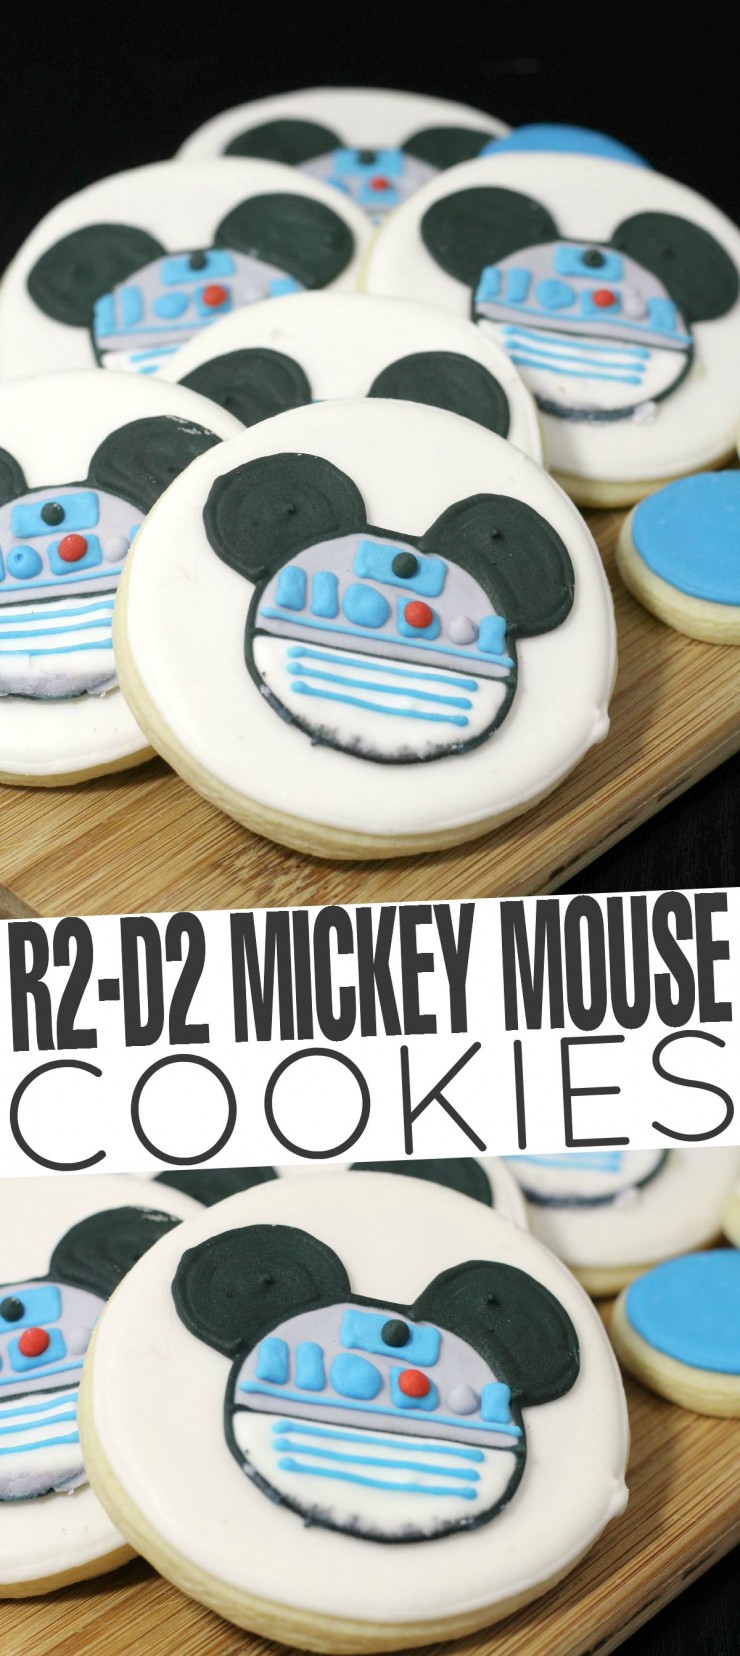 R2-D2 Mickey Mouse Cookies for Disney and Star Wars fans!